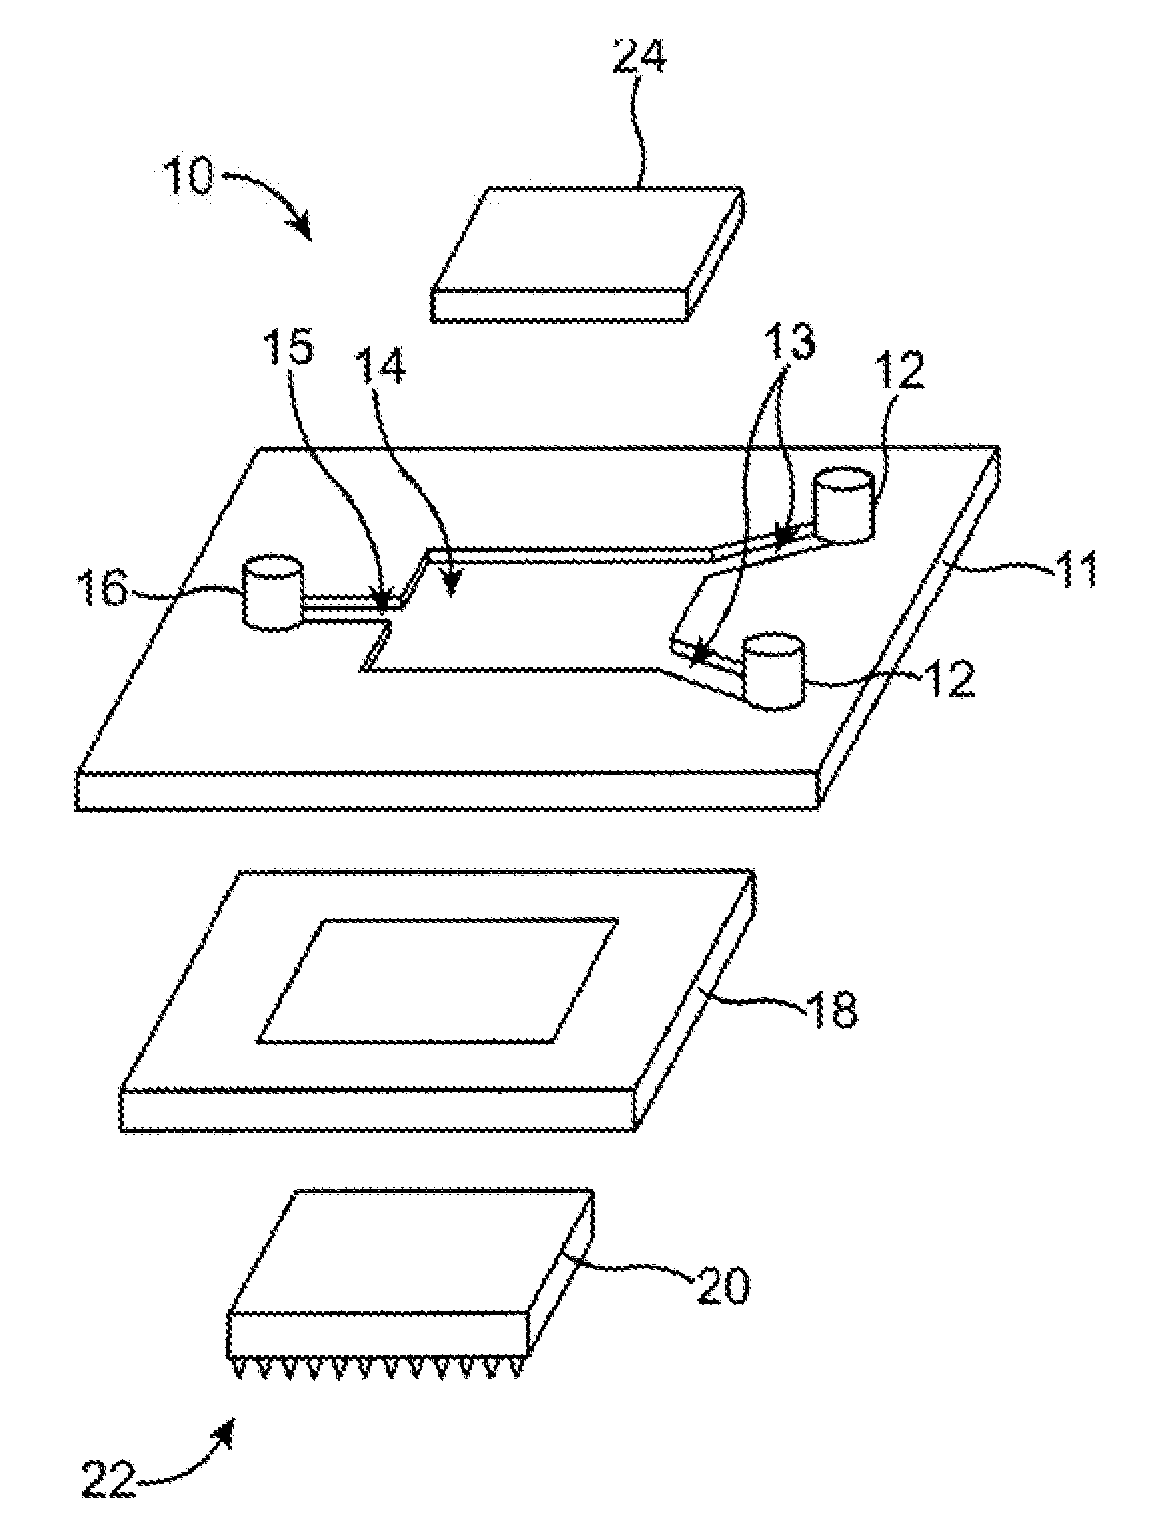 Devices and methods for enhanced skin perforation for continuous glucose monitoring